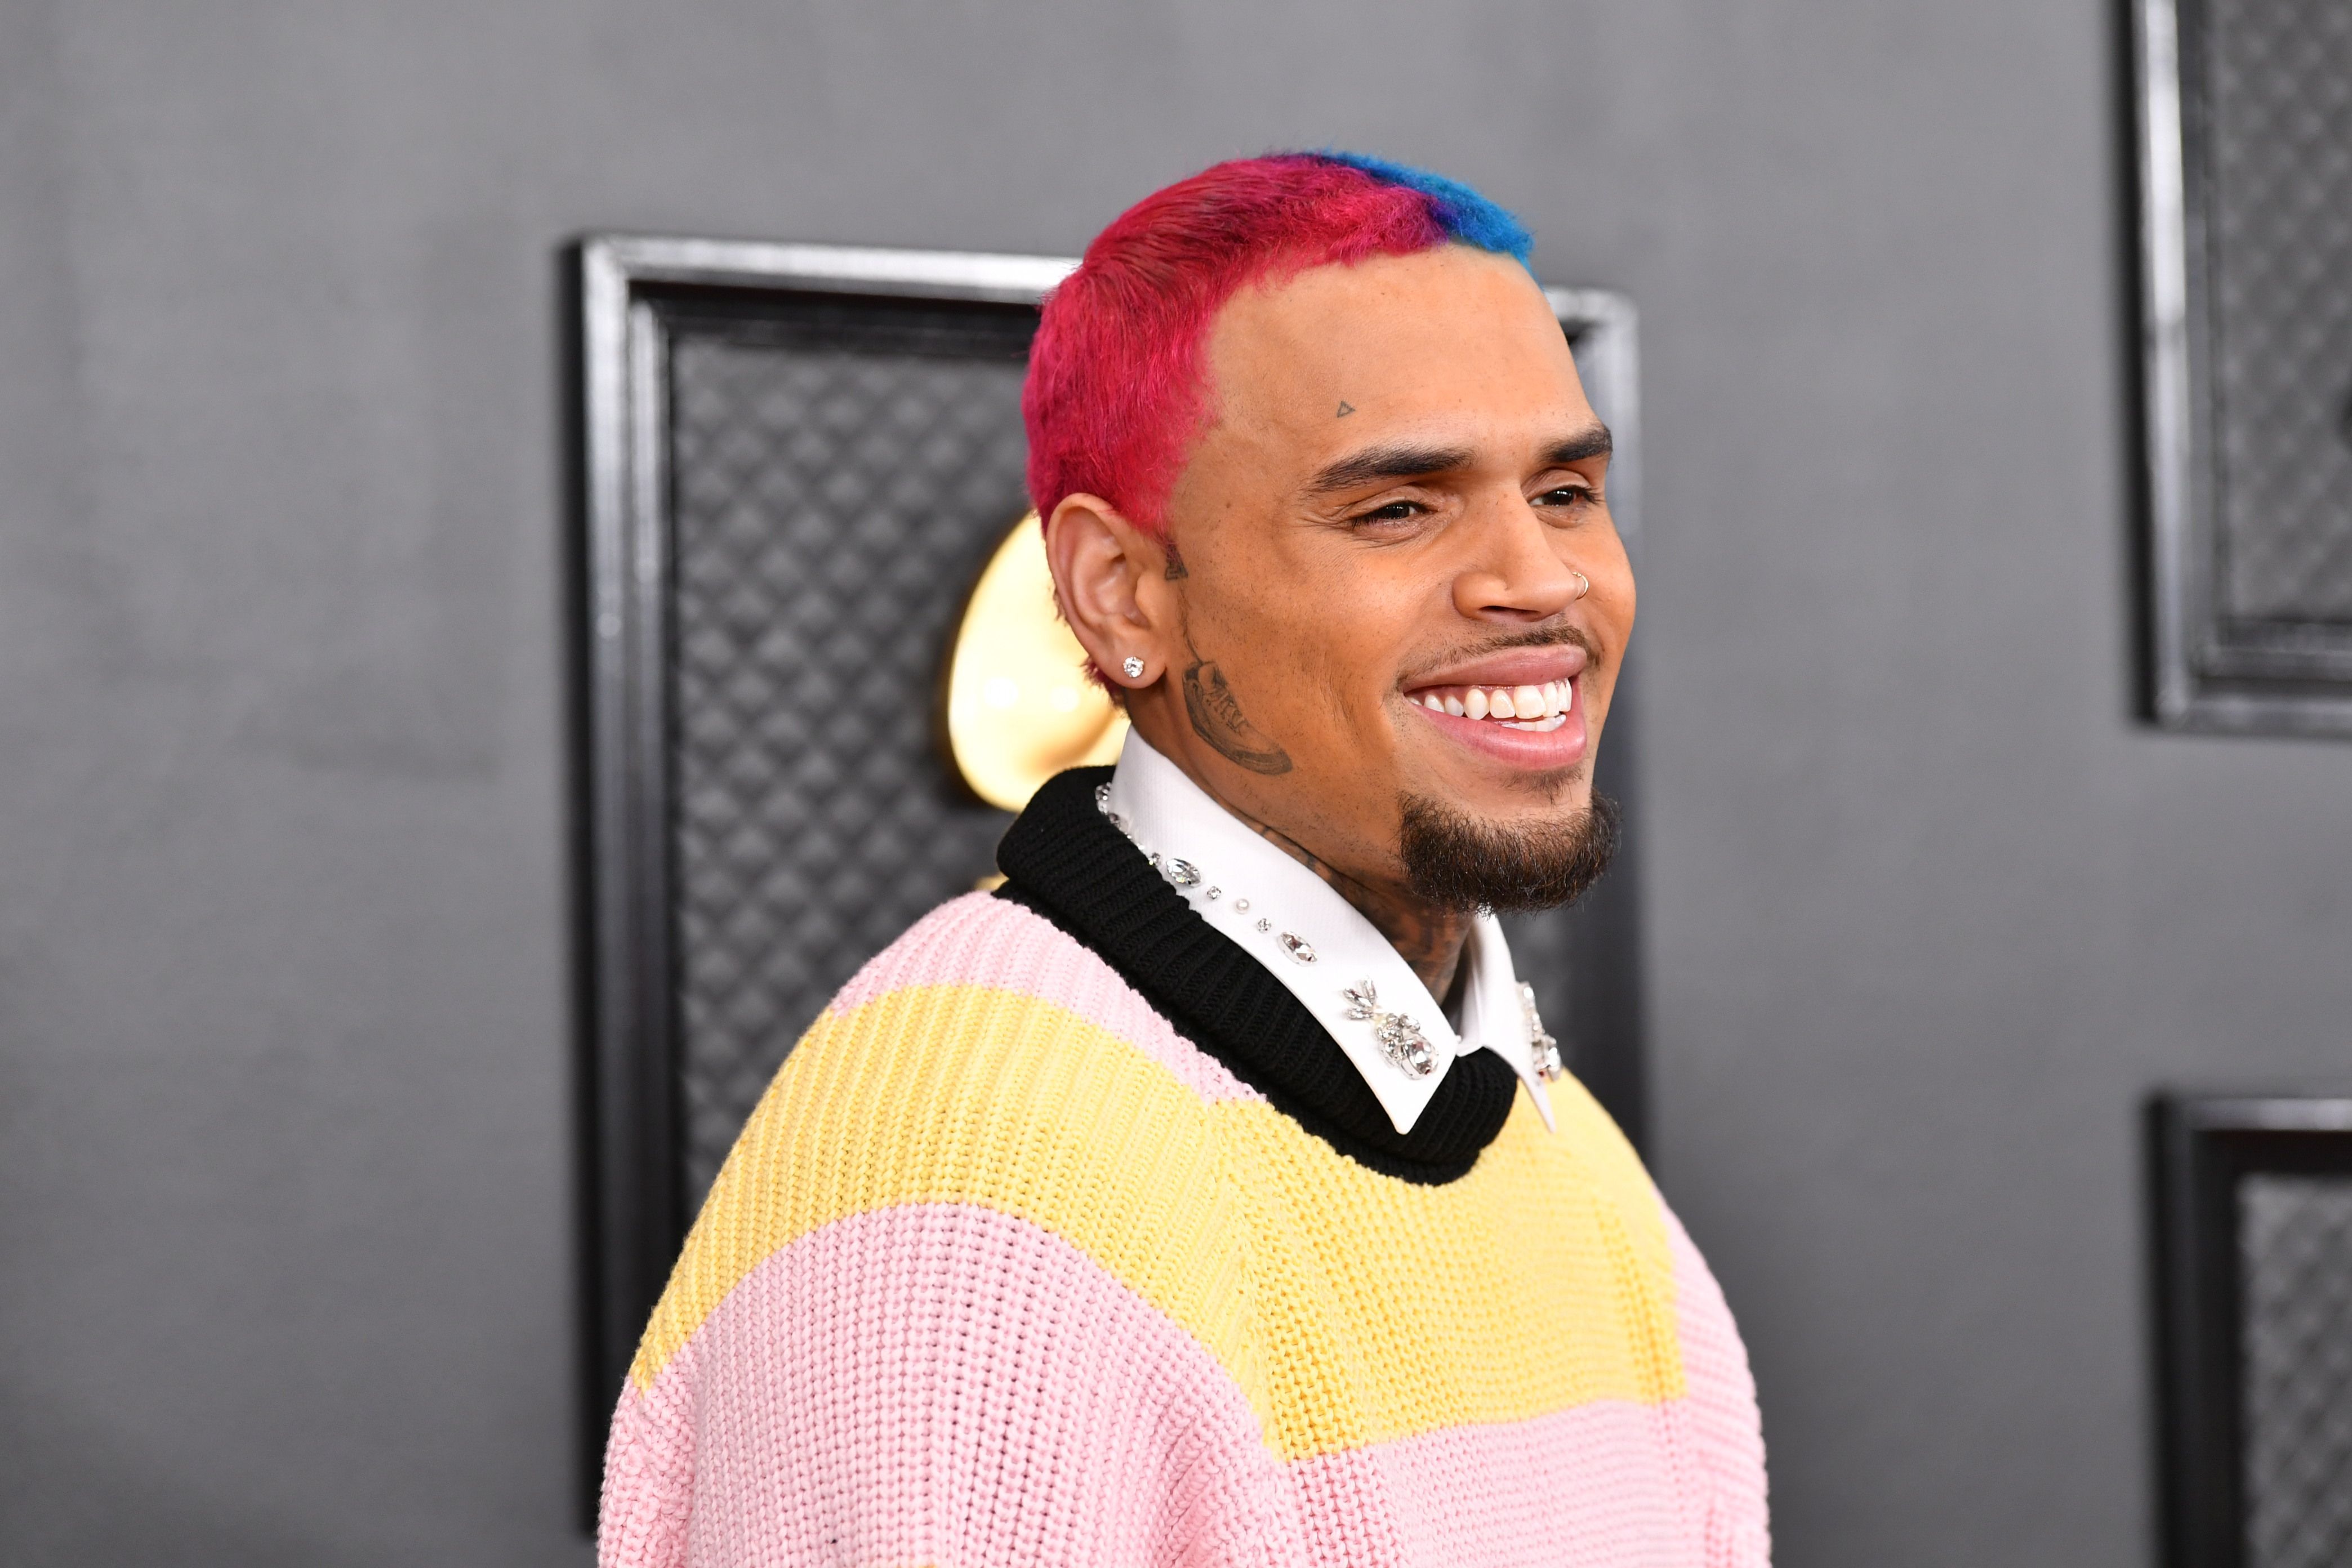 LOS ANGELES, CALIFORNIA - JANUARY 26: Chris Brown attends the 62nd Annual GRAMMY Awards at Staples Center on January 26, 2020 in Los Angeles, California. (Photo by Amy Sussman/Getty Images)